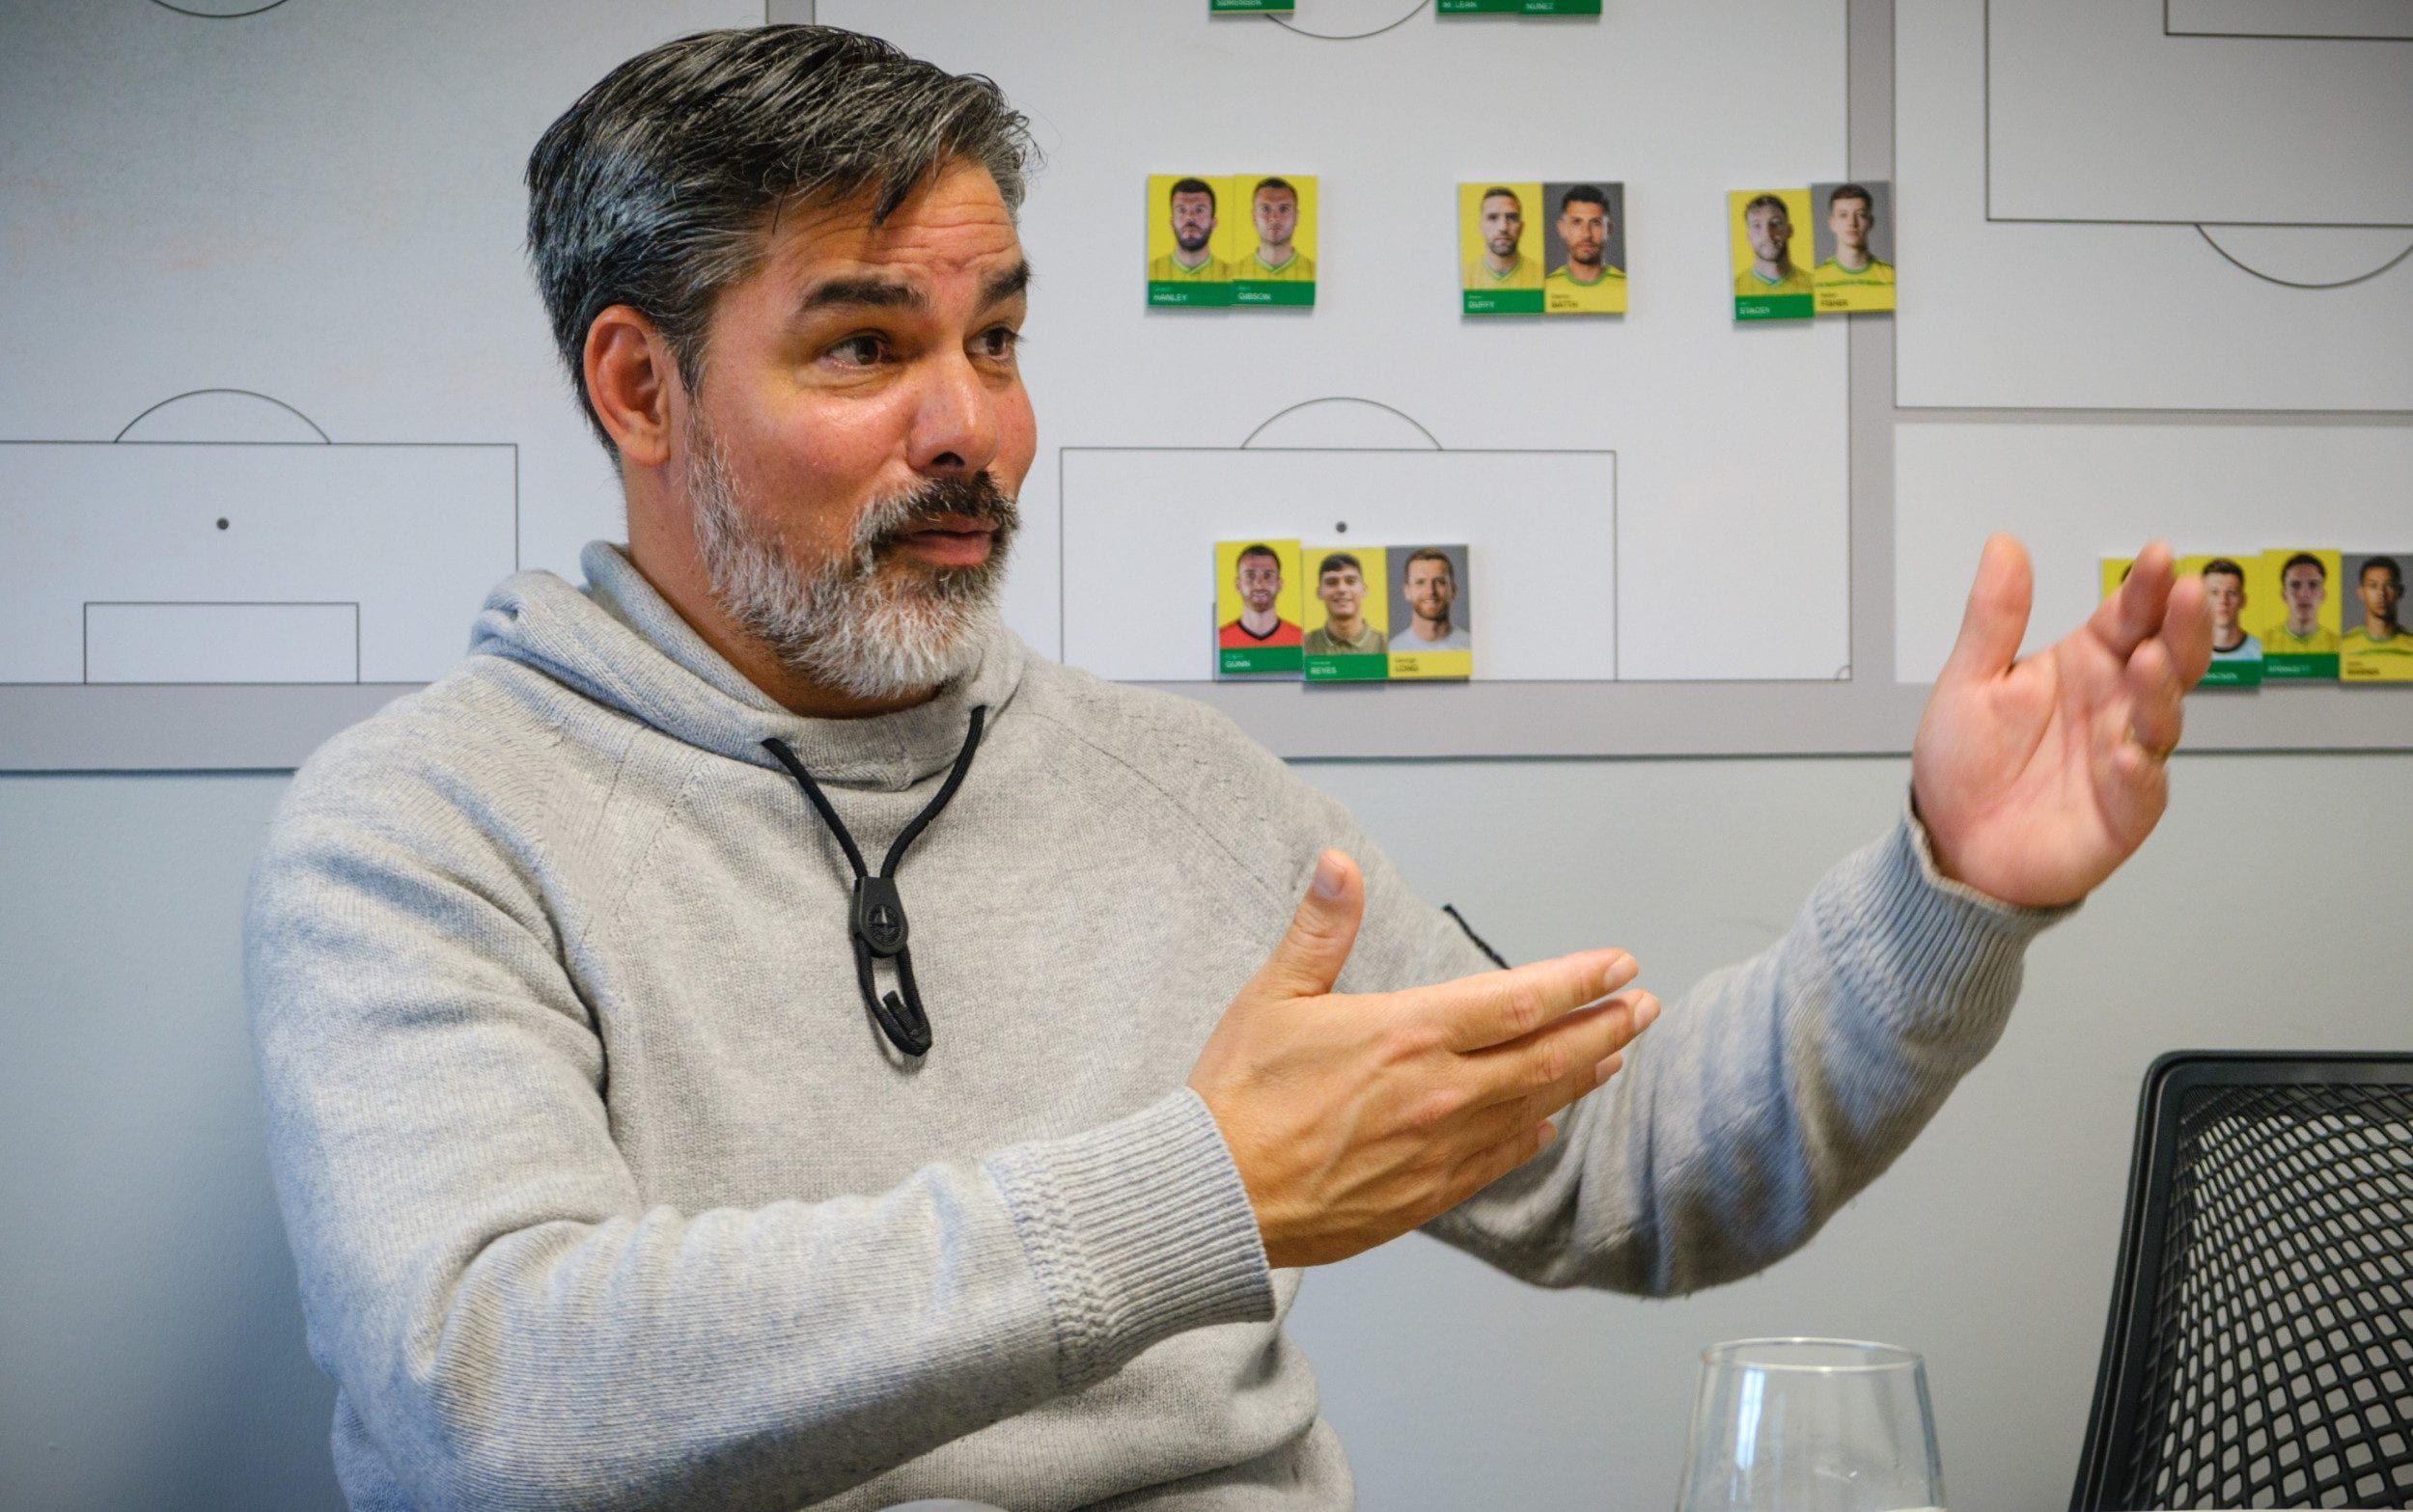 david wagner interview: a call from delia smith turned norwich’s season around